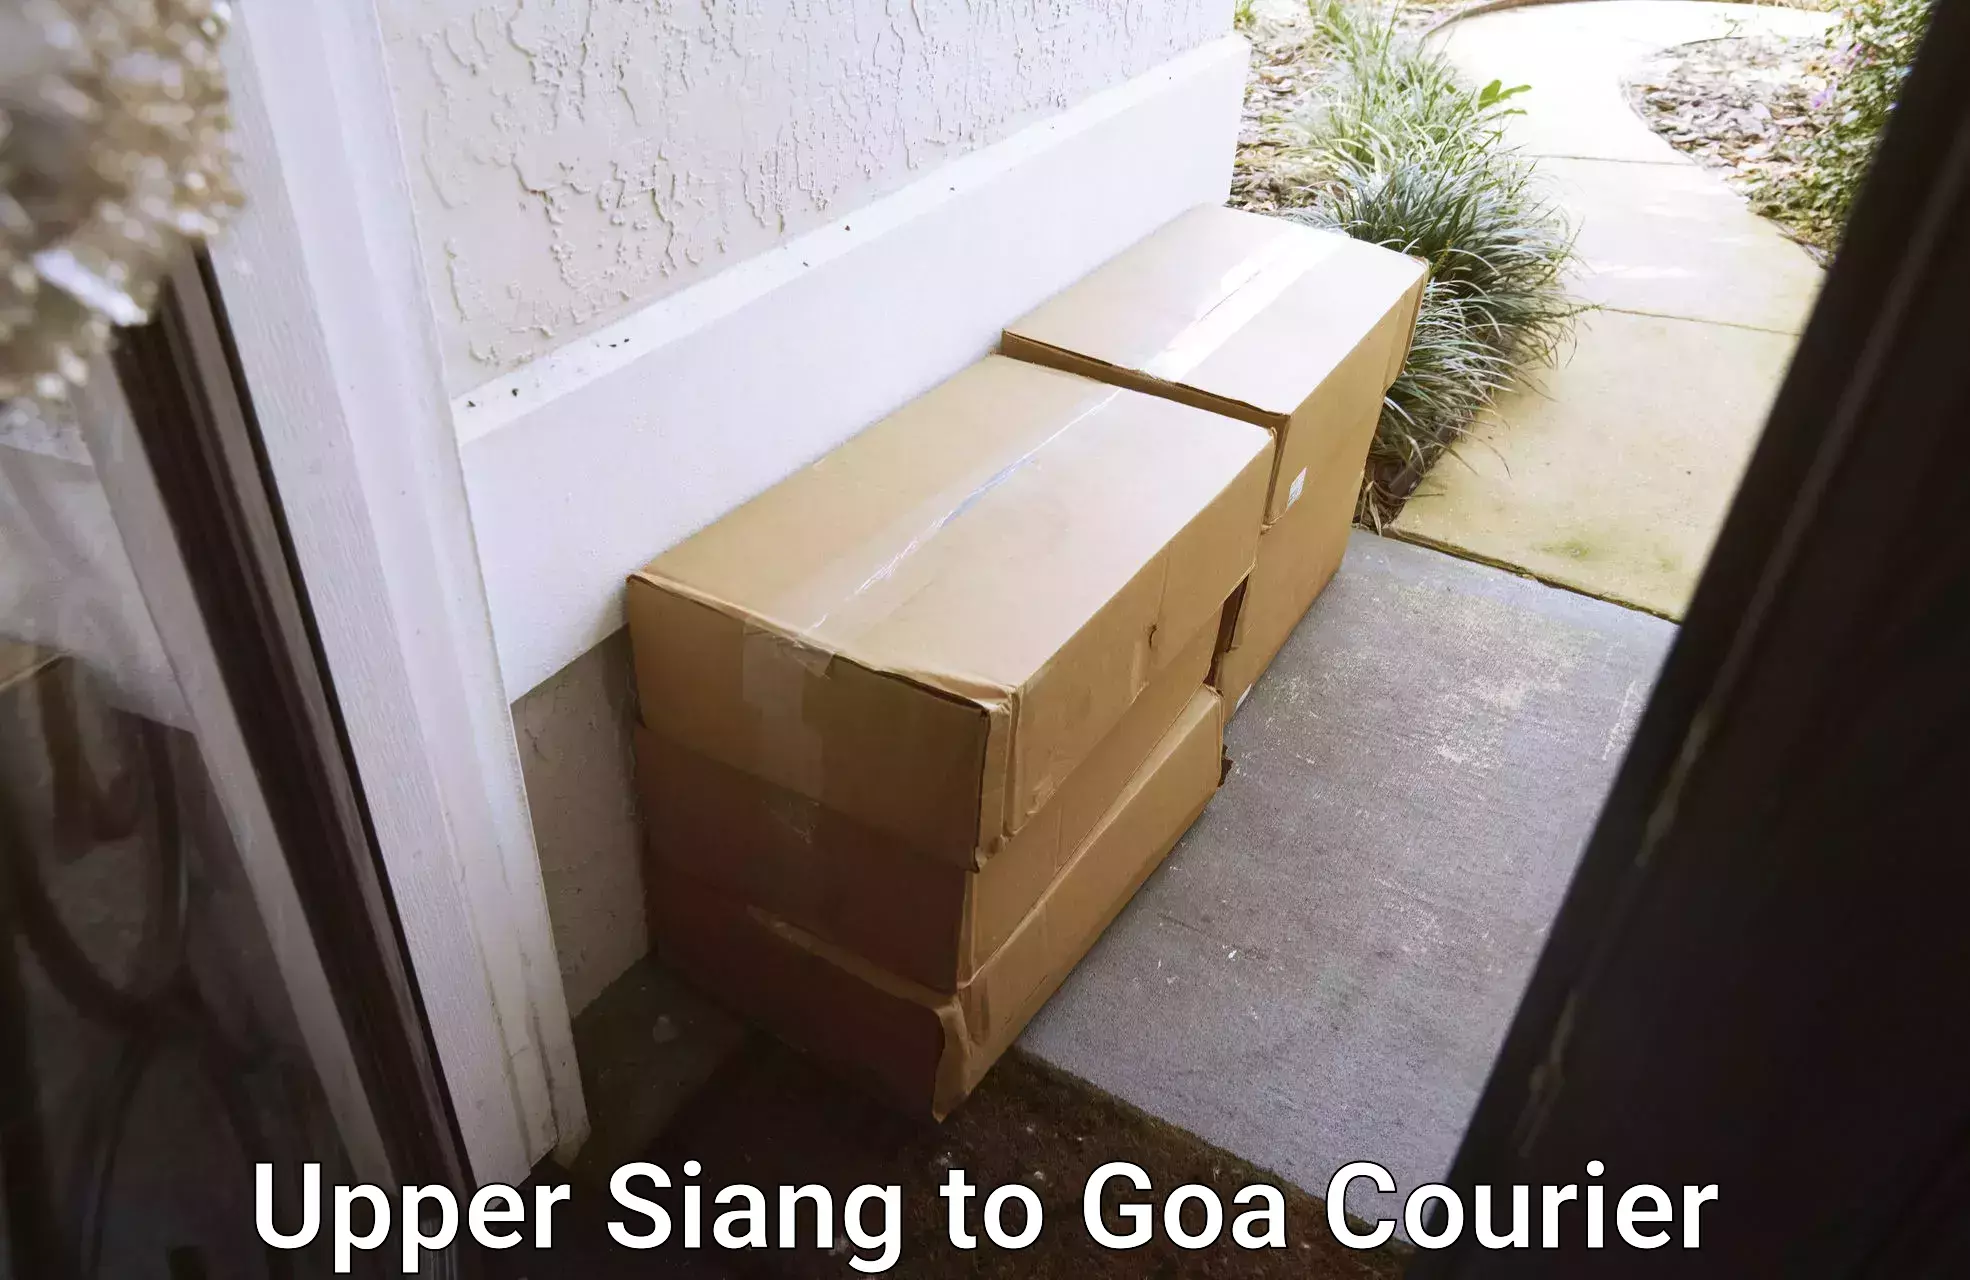 Local courier options Upper Siang to Goa